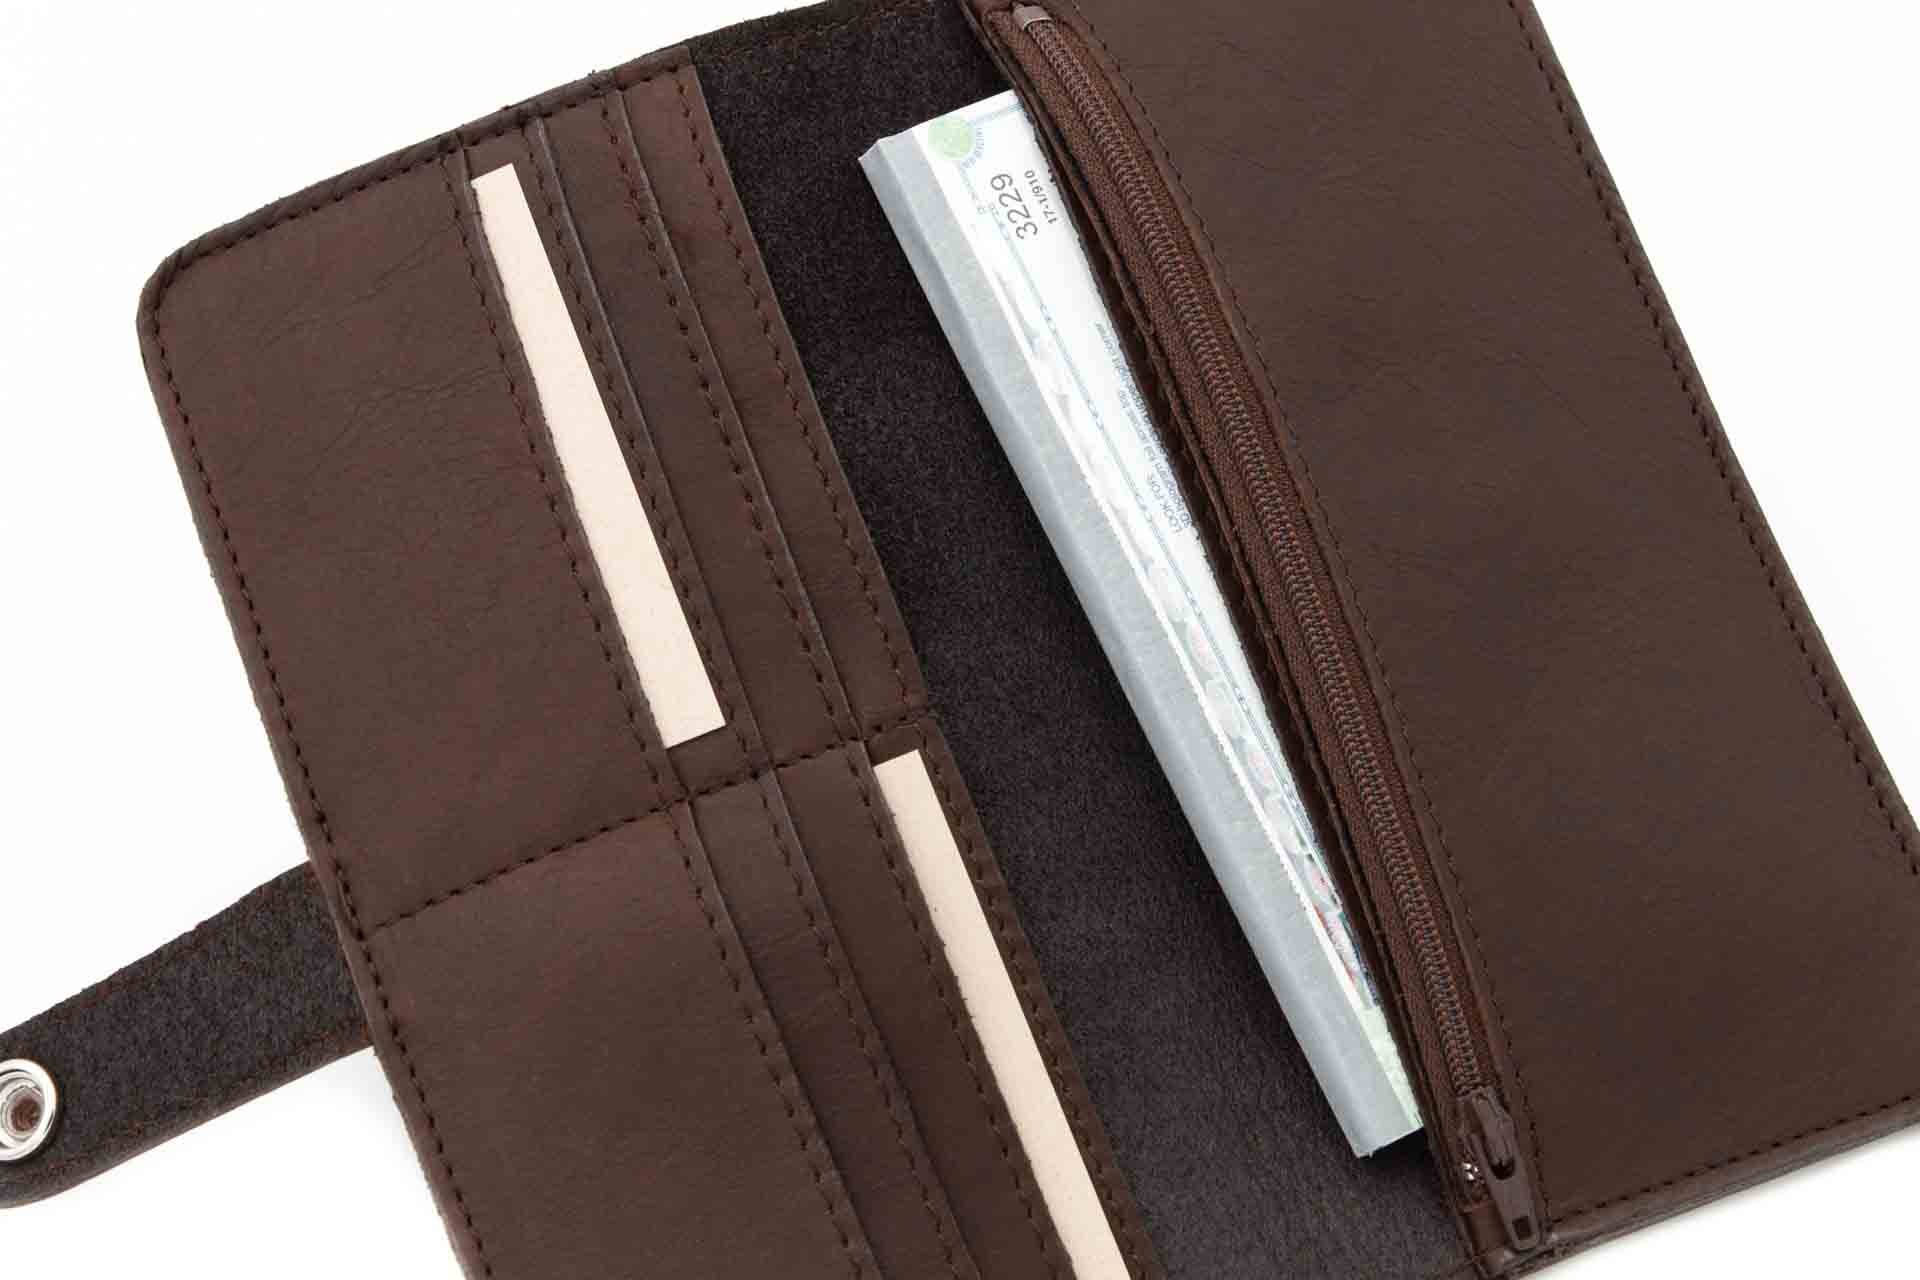 Reviews Of Big Skinny Wallets For Men And Women Keweenaw Bay Indian